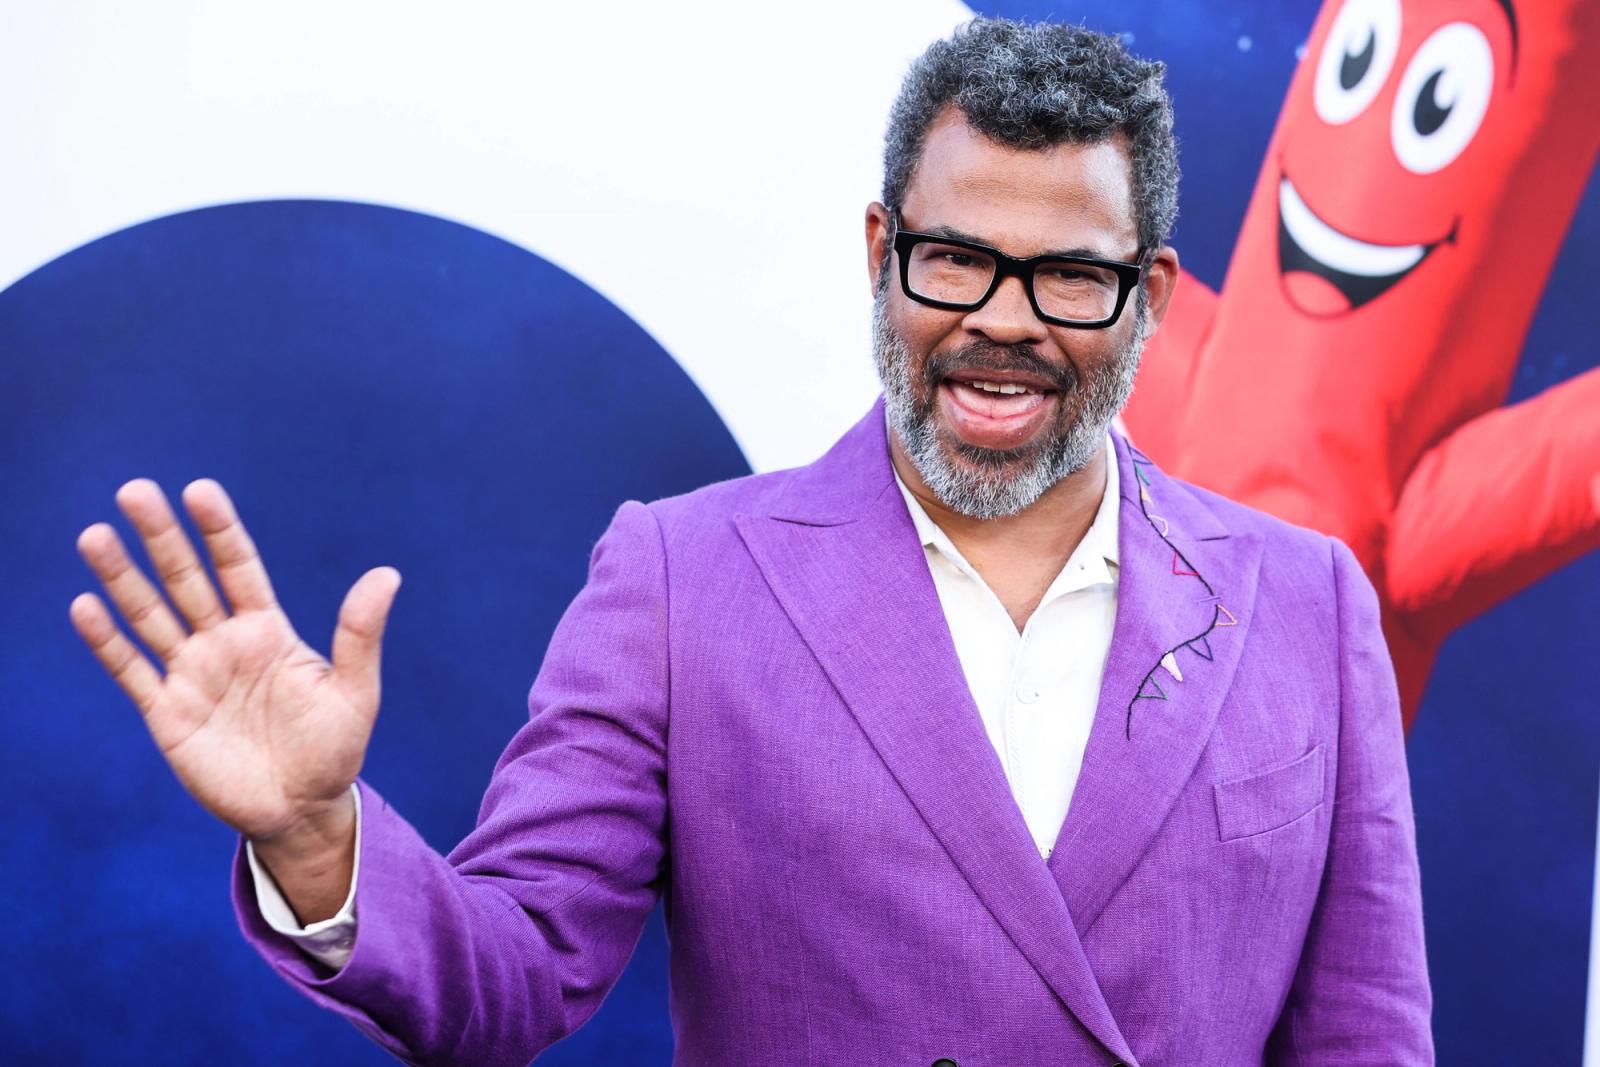 Jordan Peele arrives at the World Premiere Of Universal Pictures' 'Nope' held at the TCL Chinese Theatre IMAX